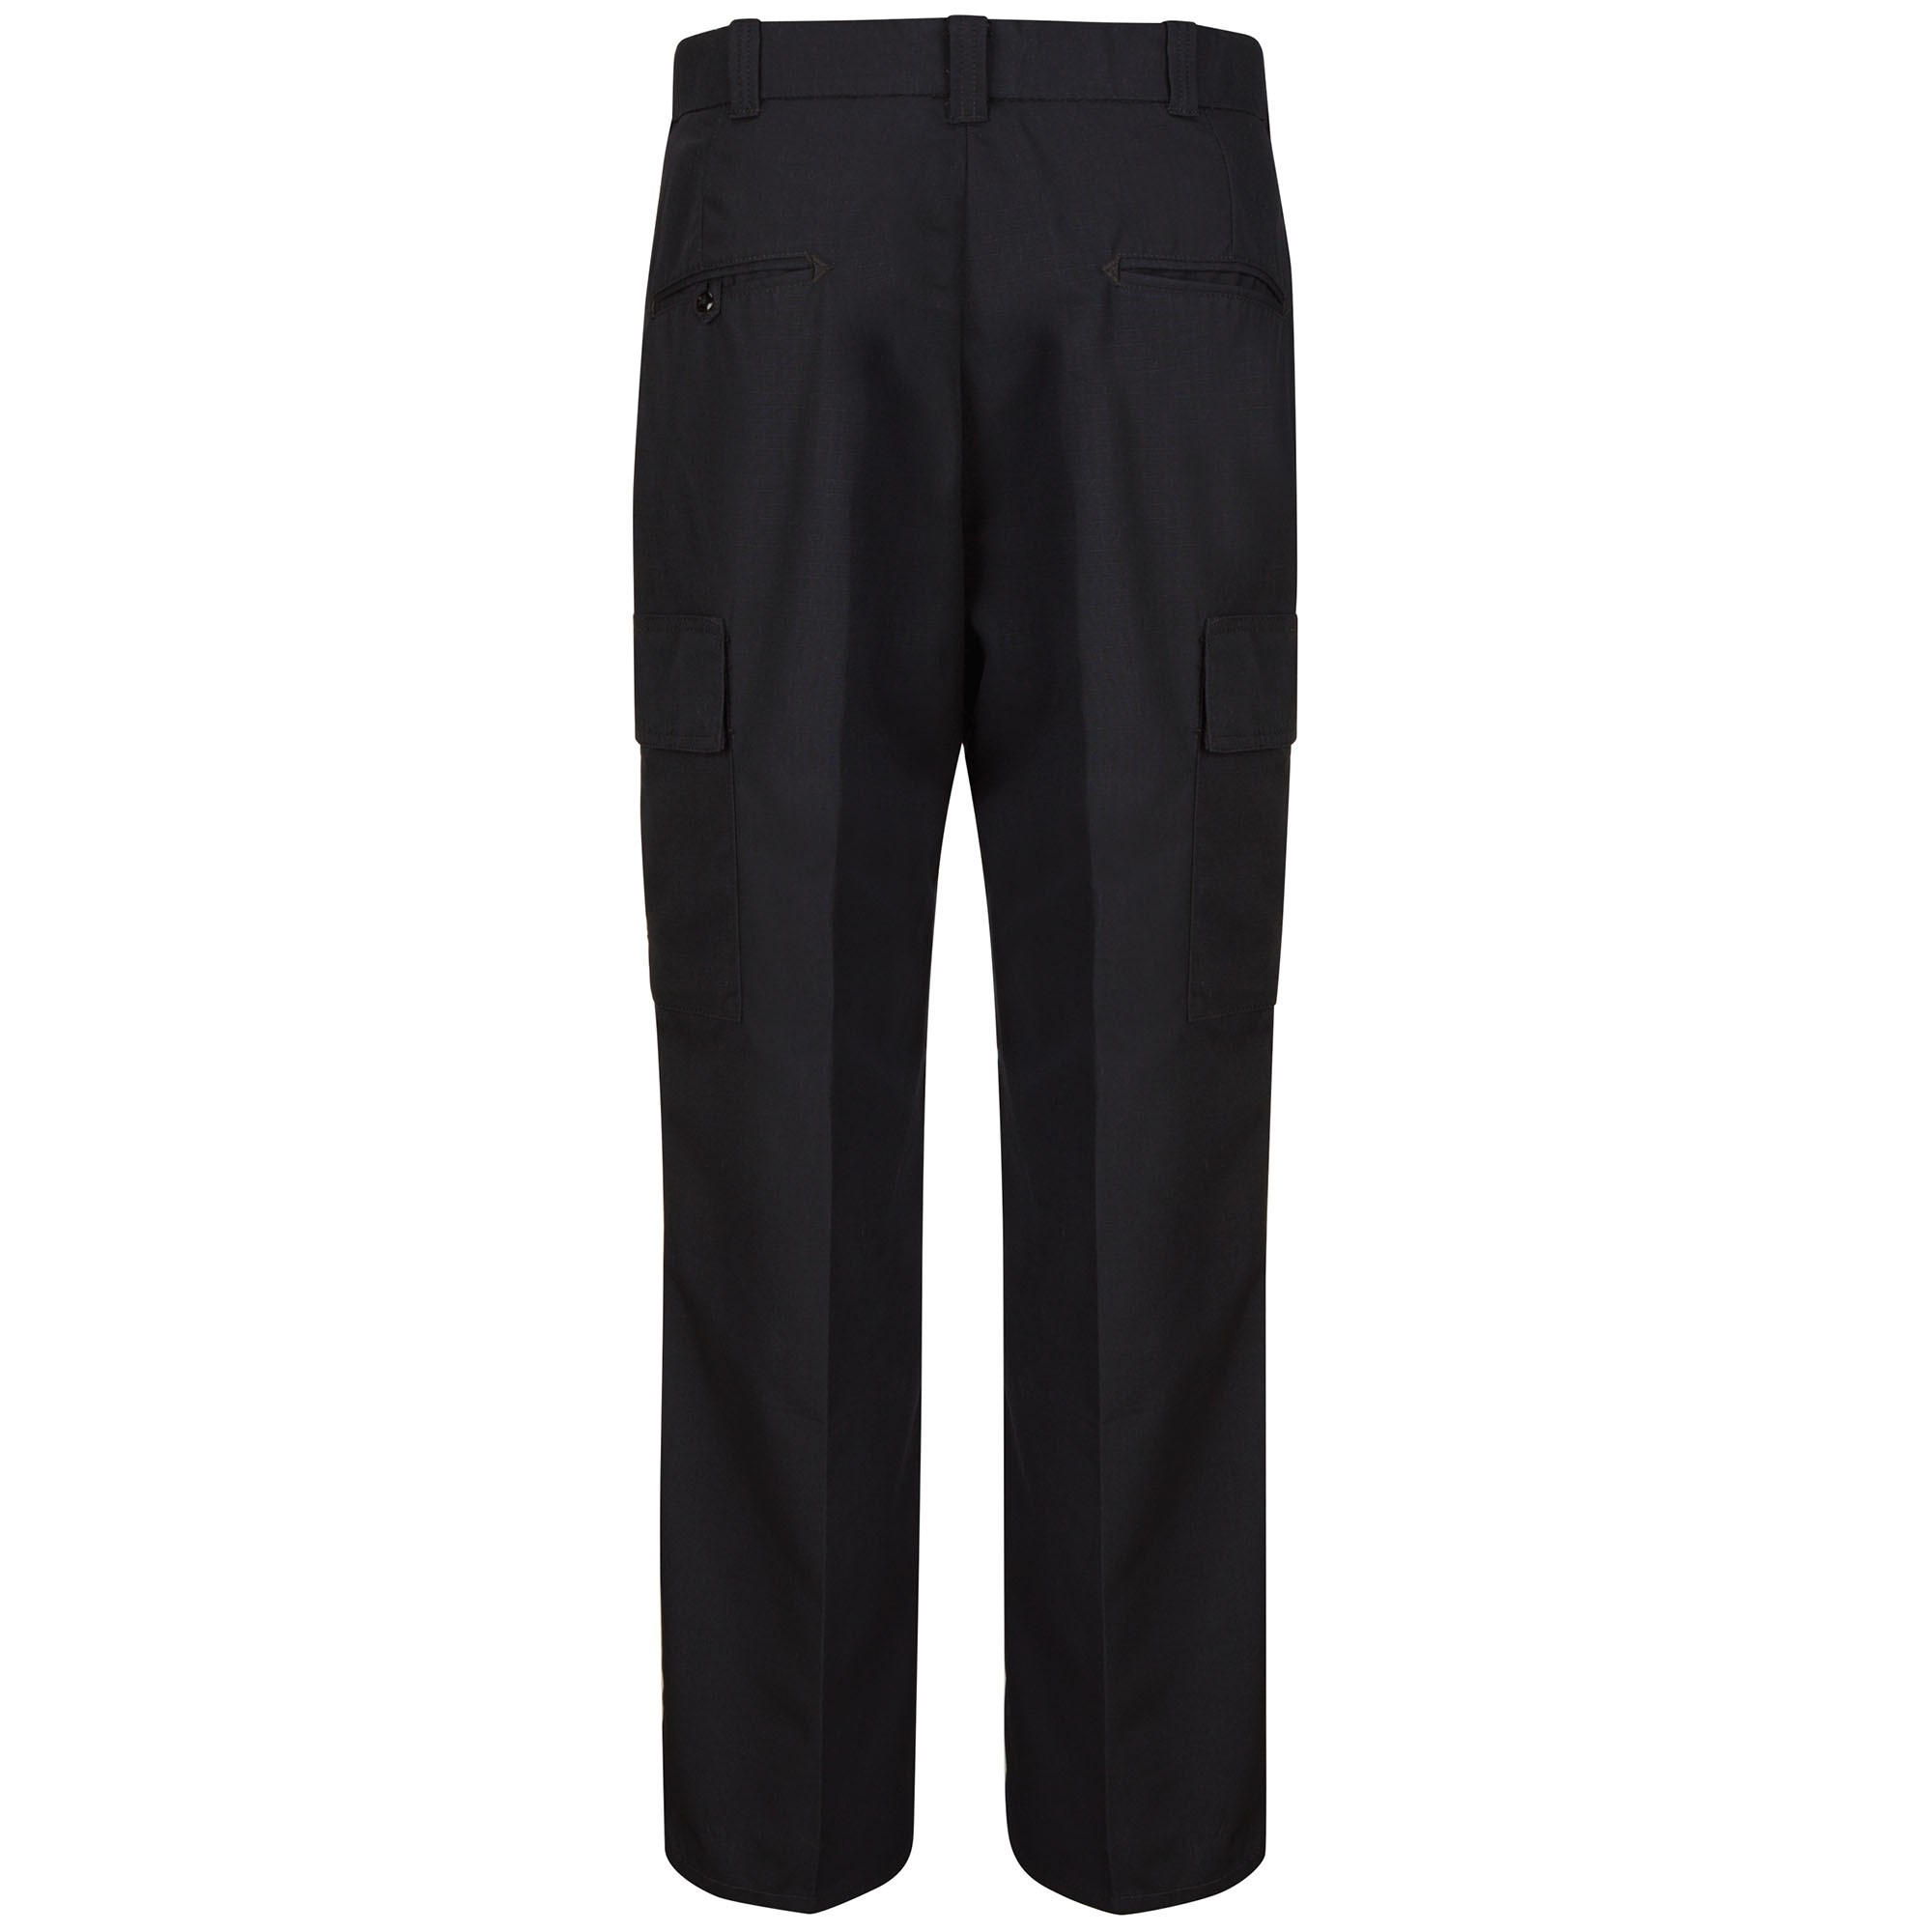 Horace Small HS2746 Men's New Dimension Plus Ripstop Cargo Trousers ...